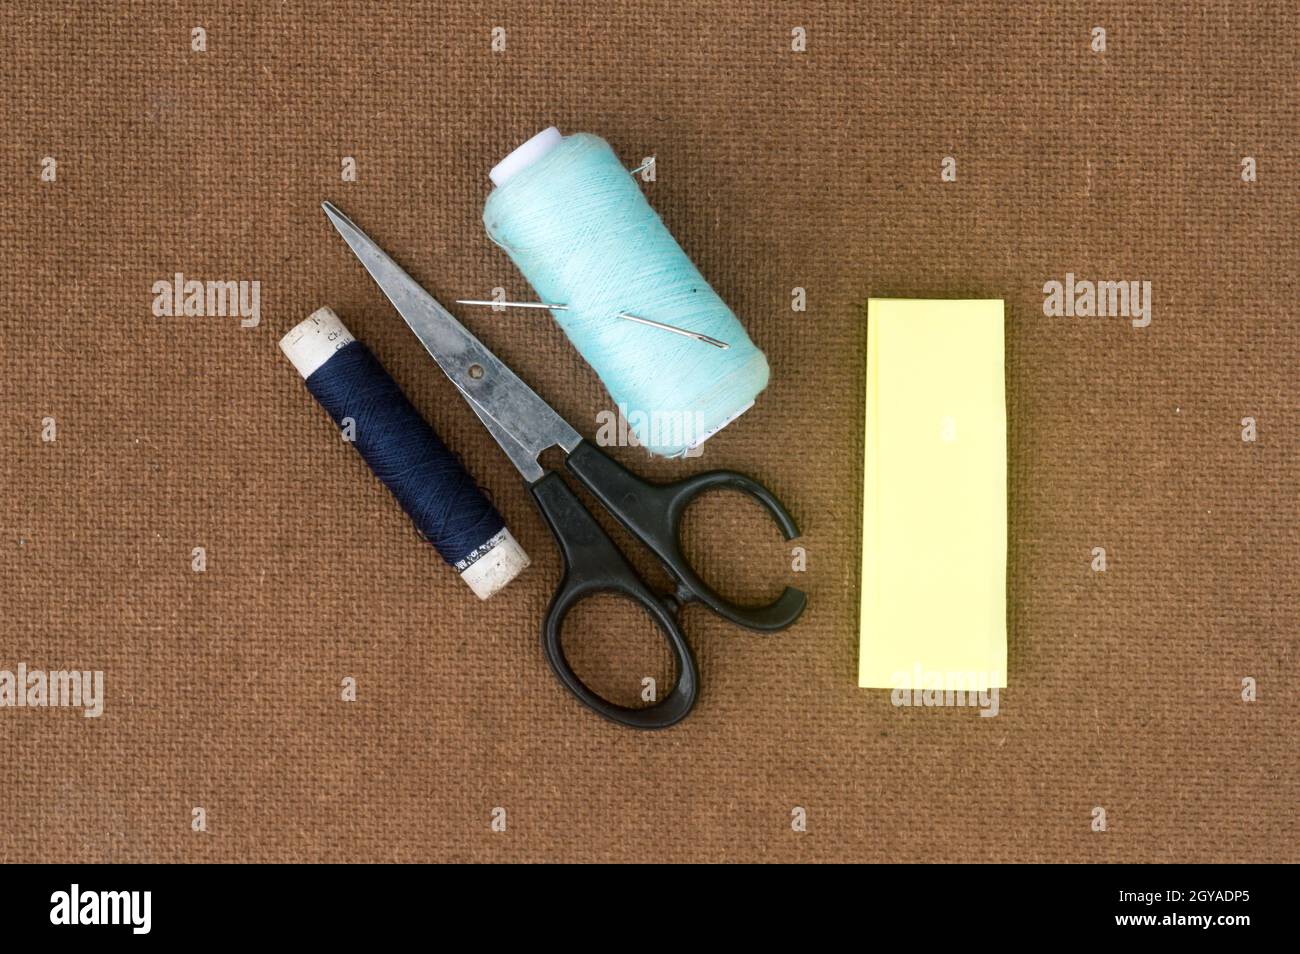 Group of sewing tools and items for knitting and weaving placed on a brown colour woven paper board. DIY Art and craft background concept. Stock Photo